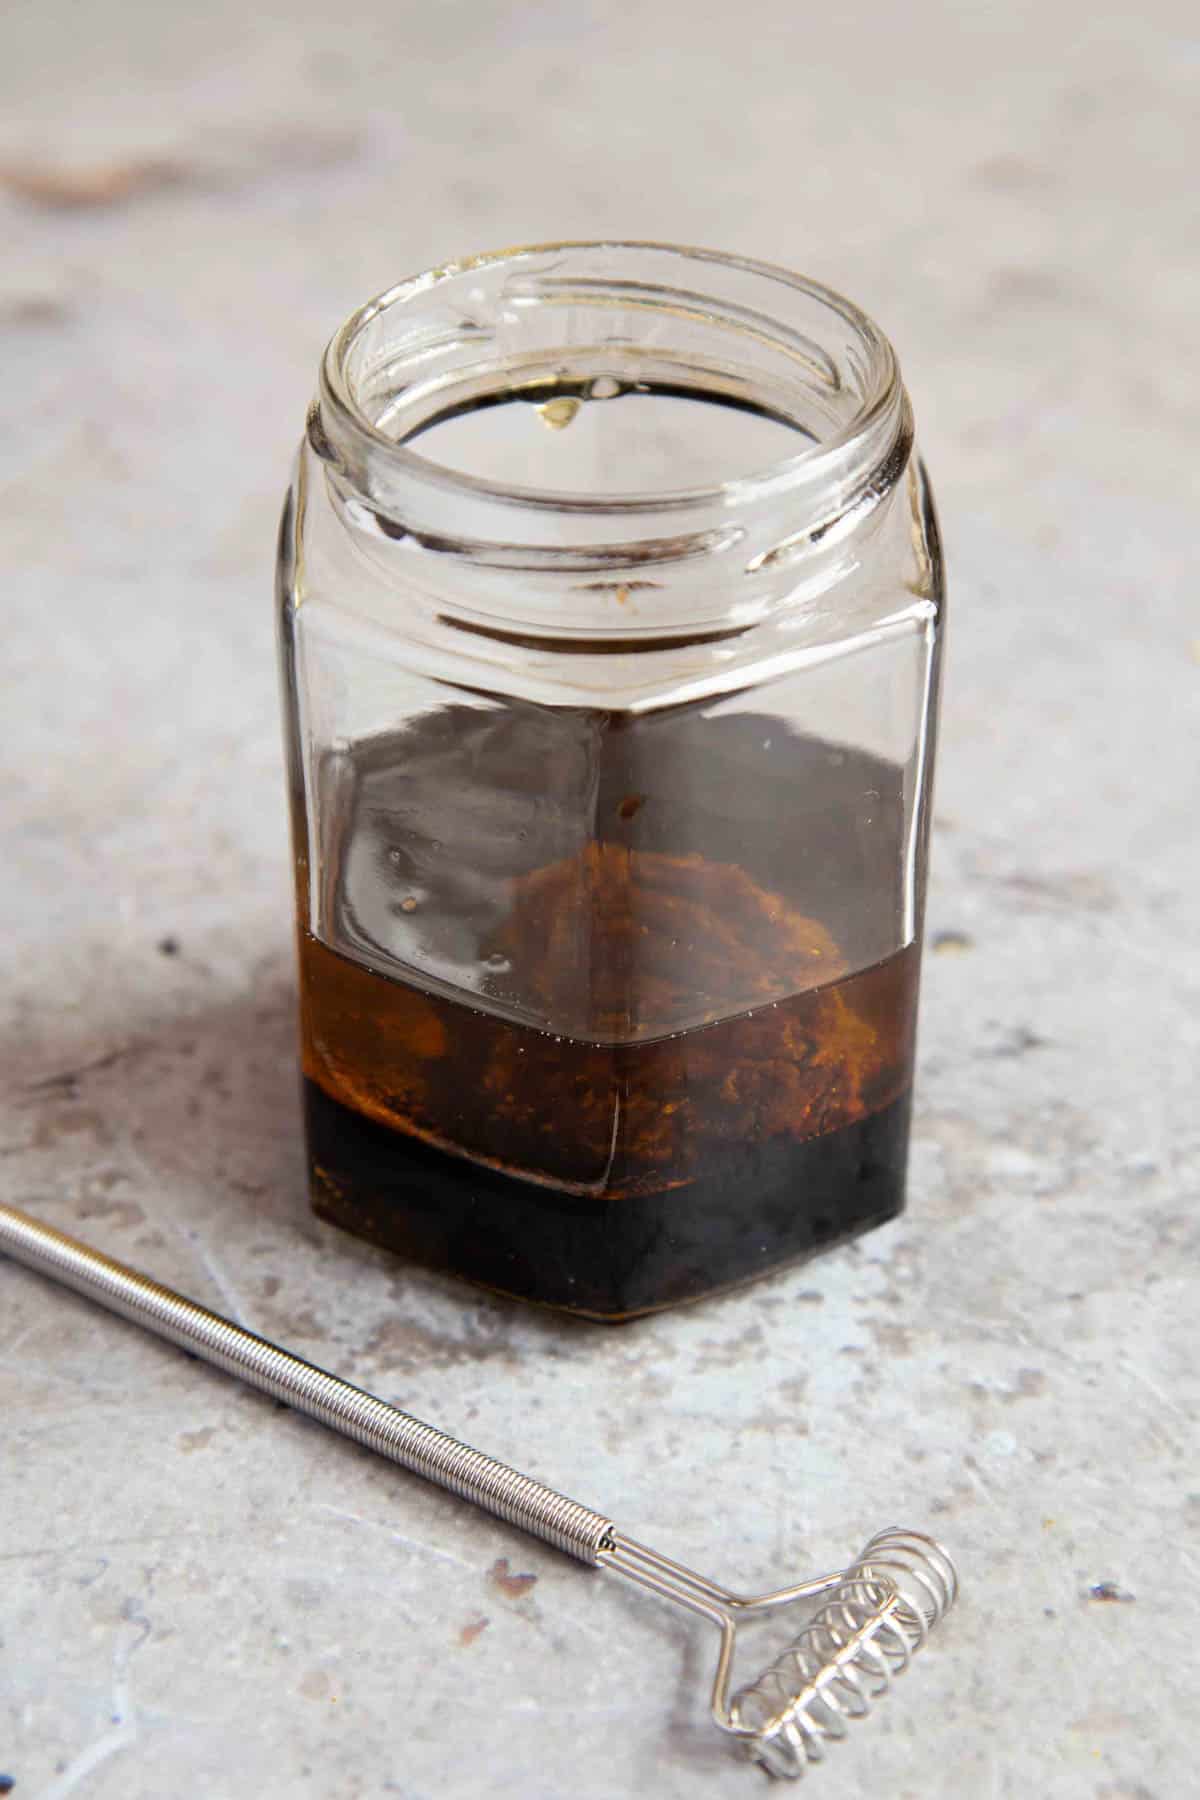 The ingredients in a jar, the oil at the top.